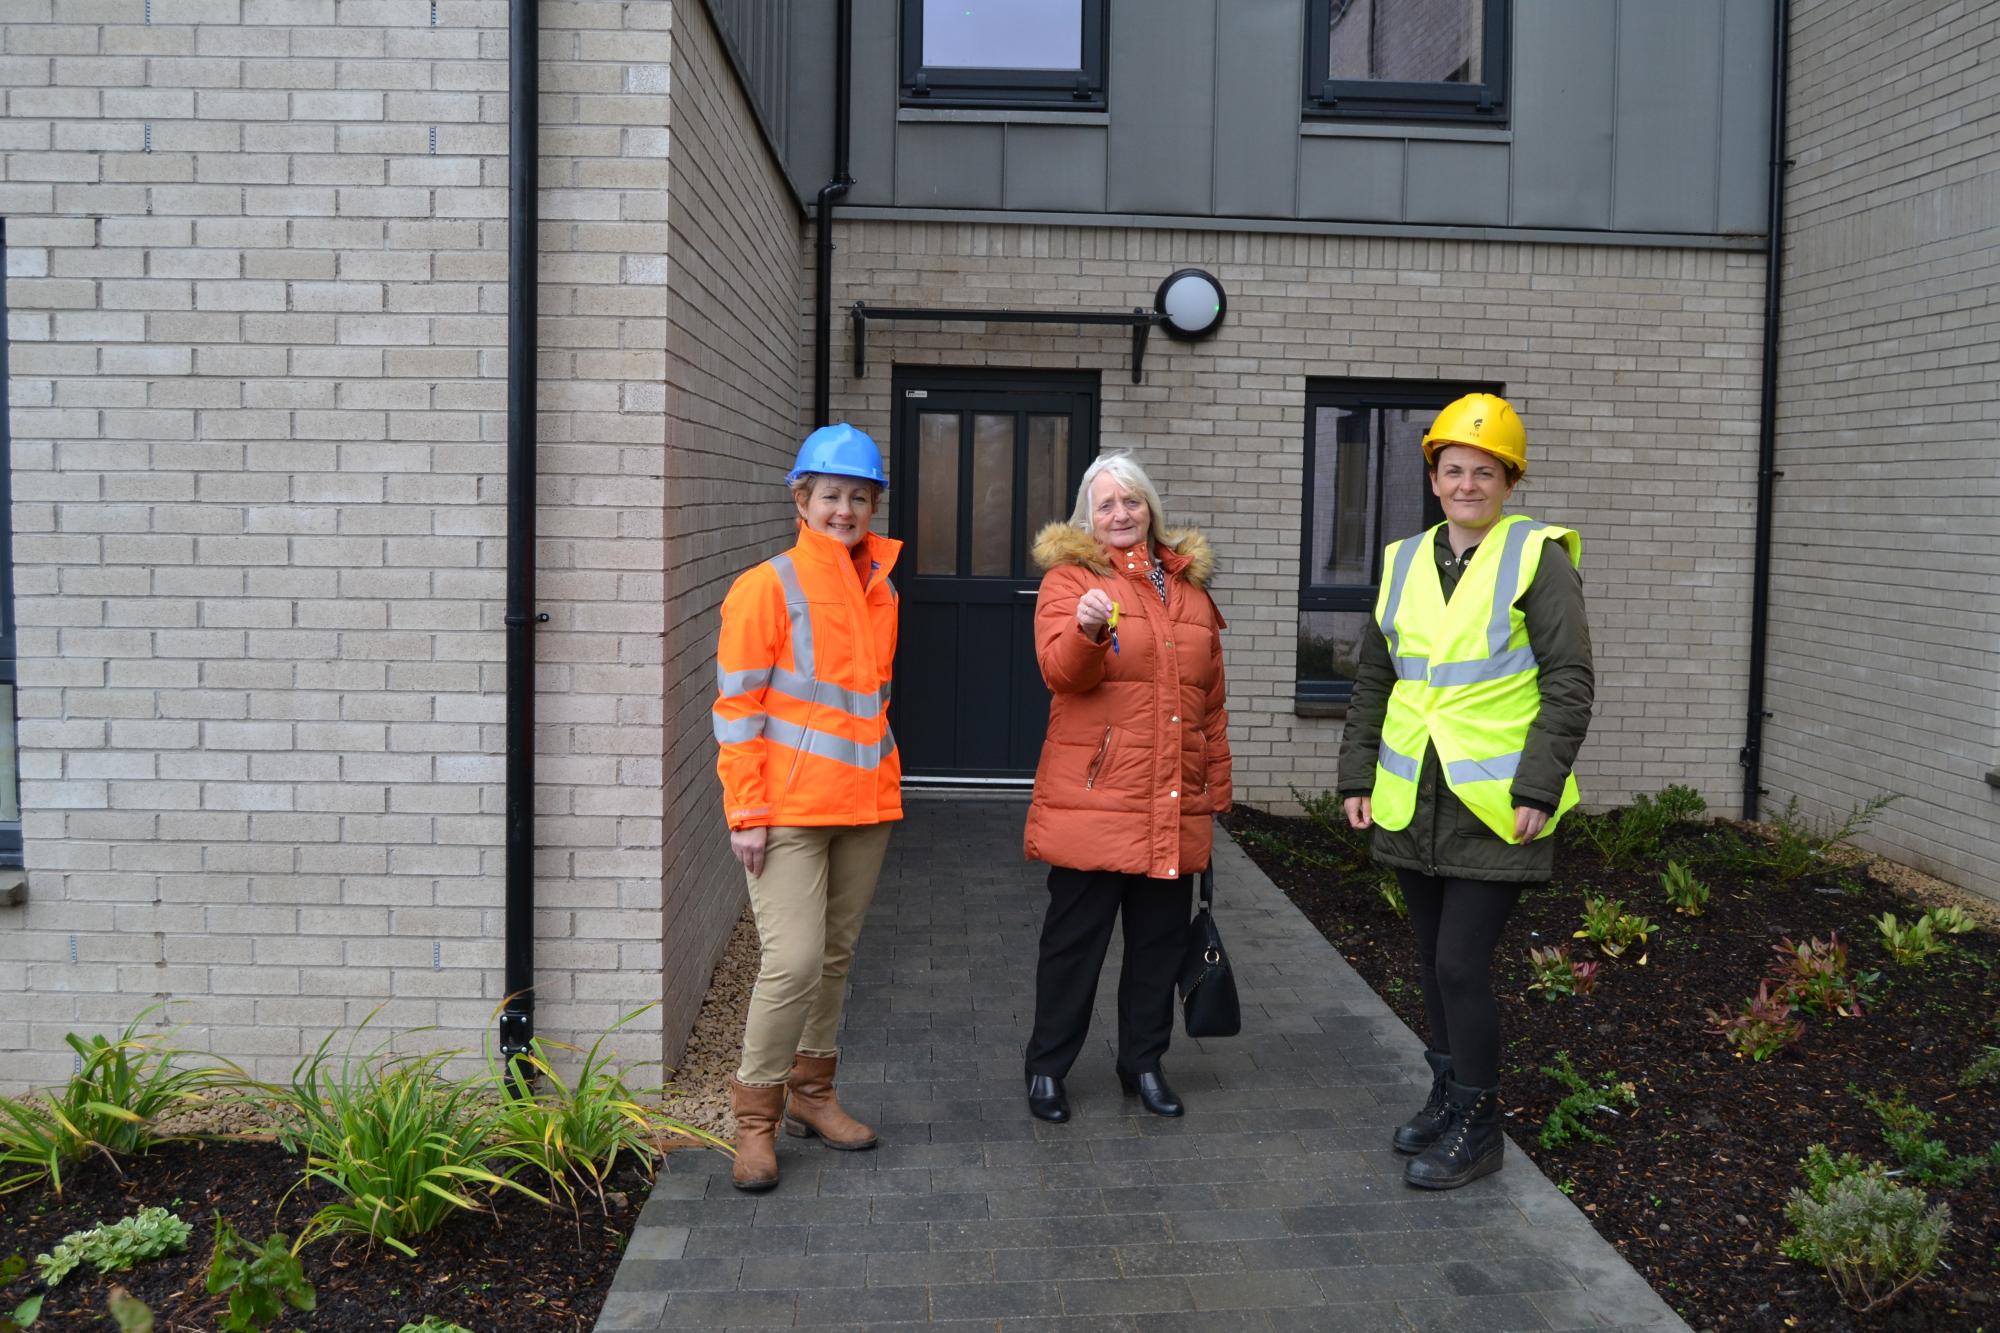 tenant standing outside the new housing with two construction workers in high vis after getting keys to new home